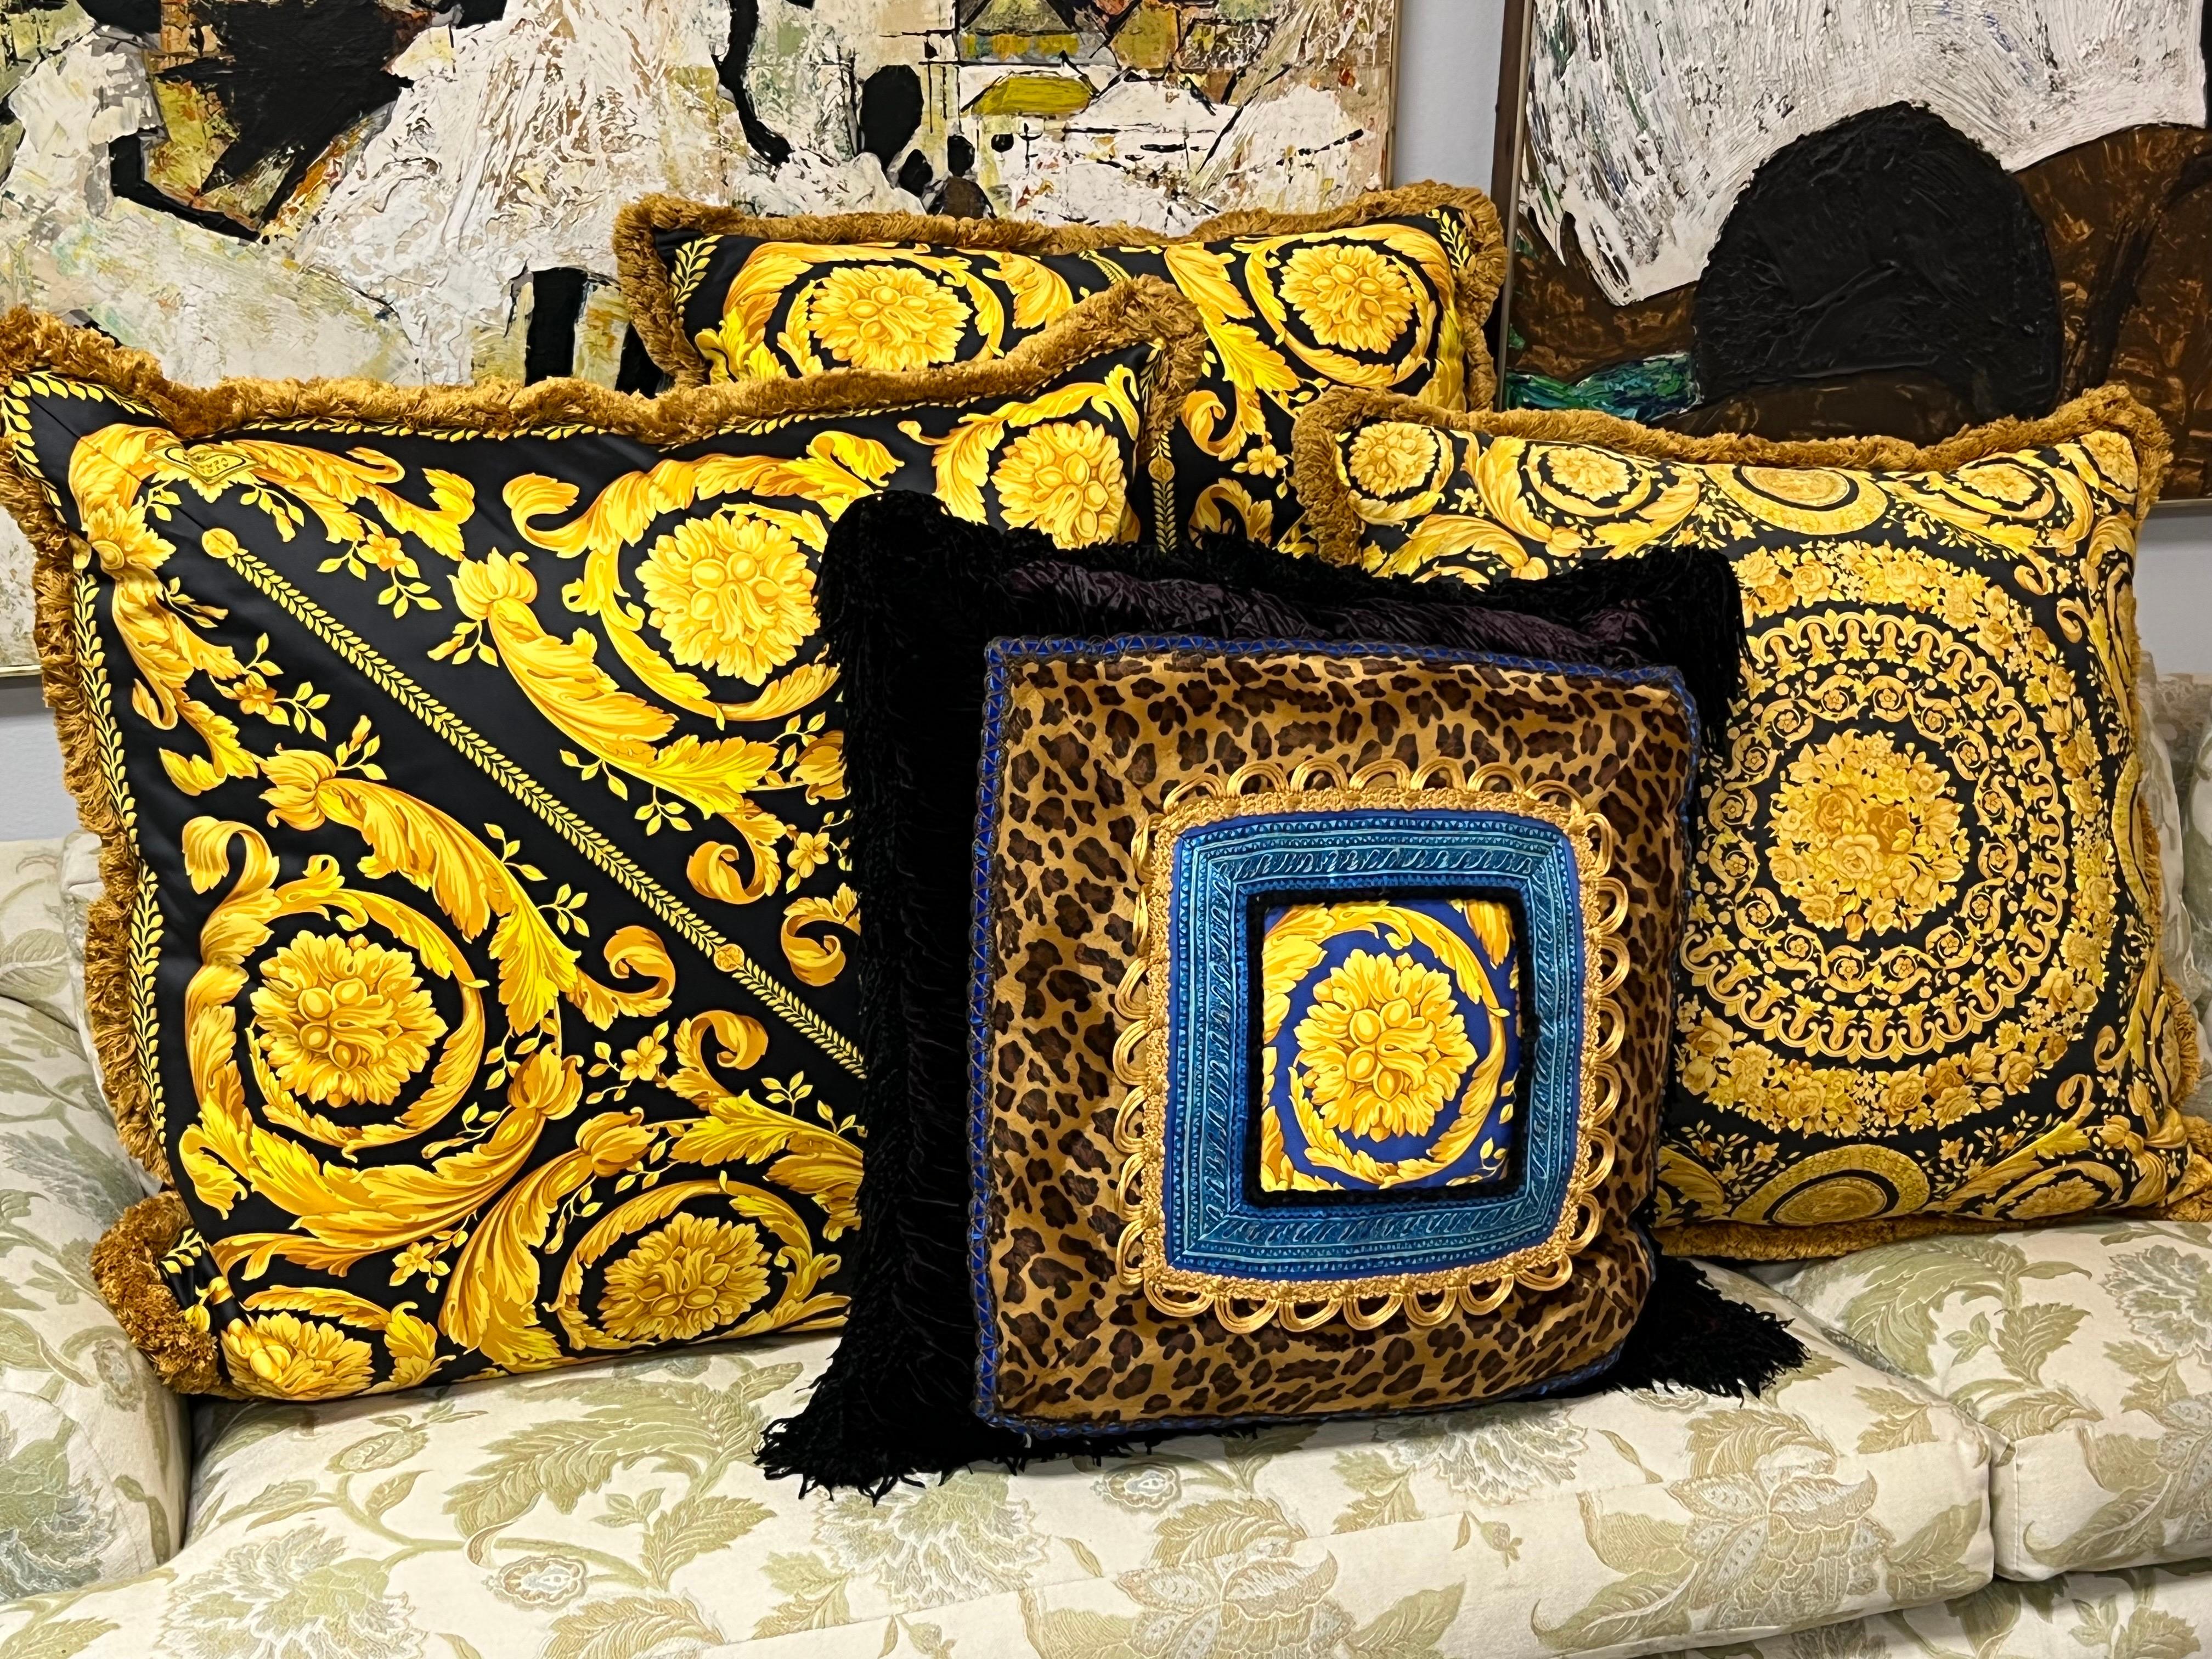 Atelier Versace 4 Large Vintage Pillows In Good Condition For Sale In Miami, FL